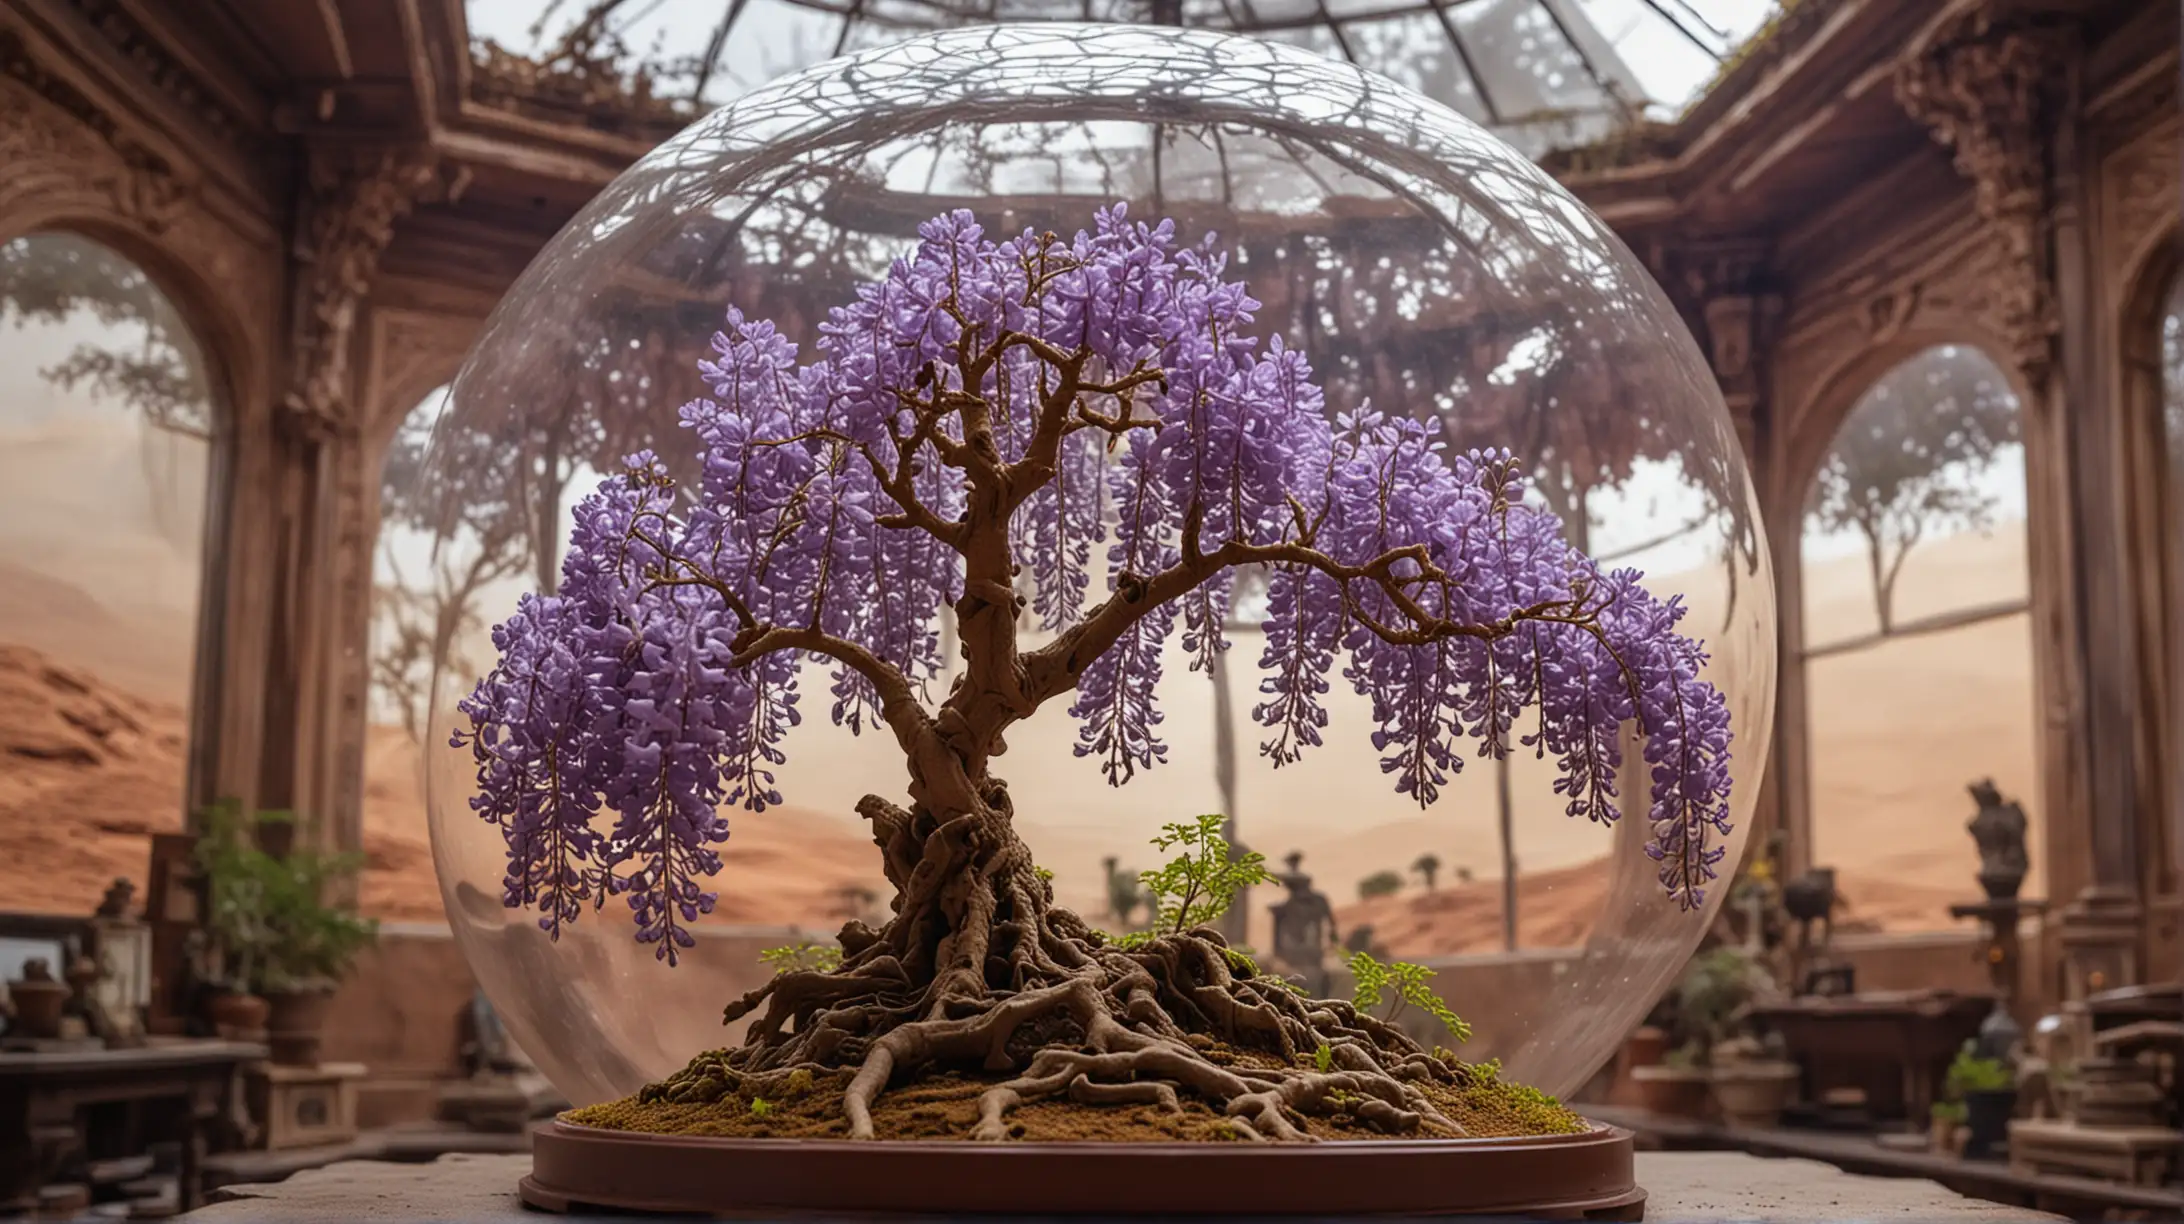 stunning wisteria bonsai on Mars surface under glass dome